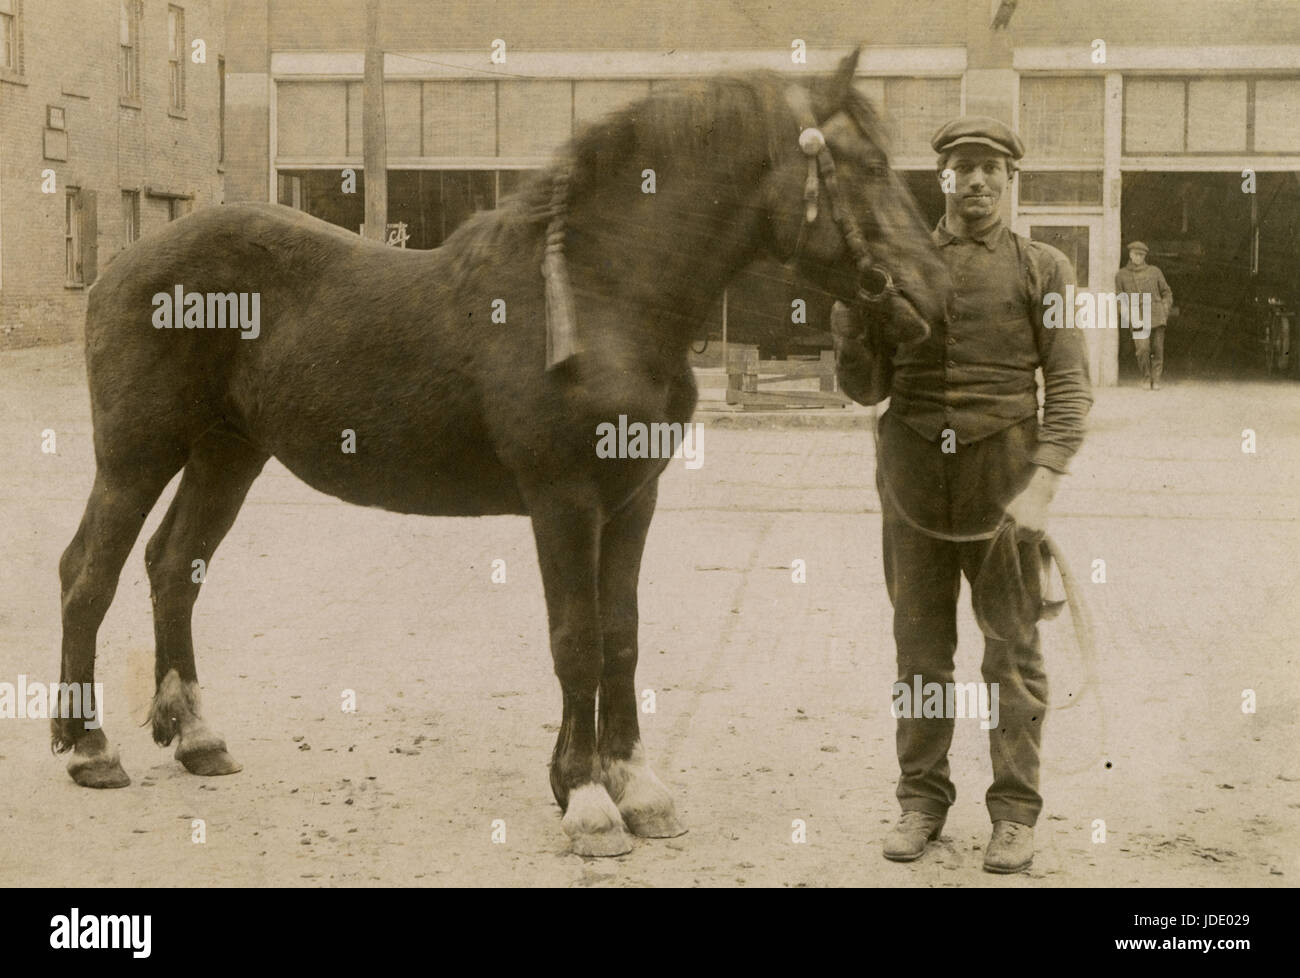 Antique c1910 photograph, worker with horse in front of the Buick Motor Company. Location is probably Mankato, Minnesota. SOURCE: ORIGINAL PHOTOGRAPH. Stock Photo